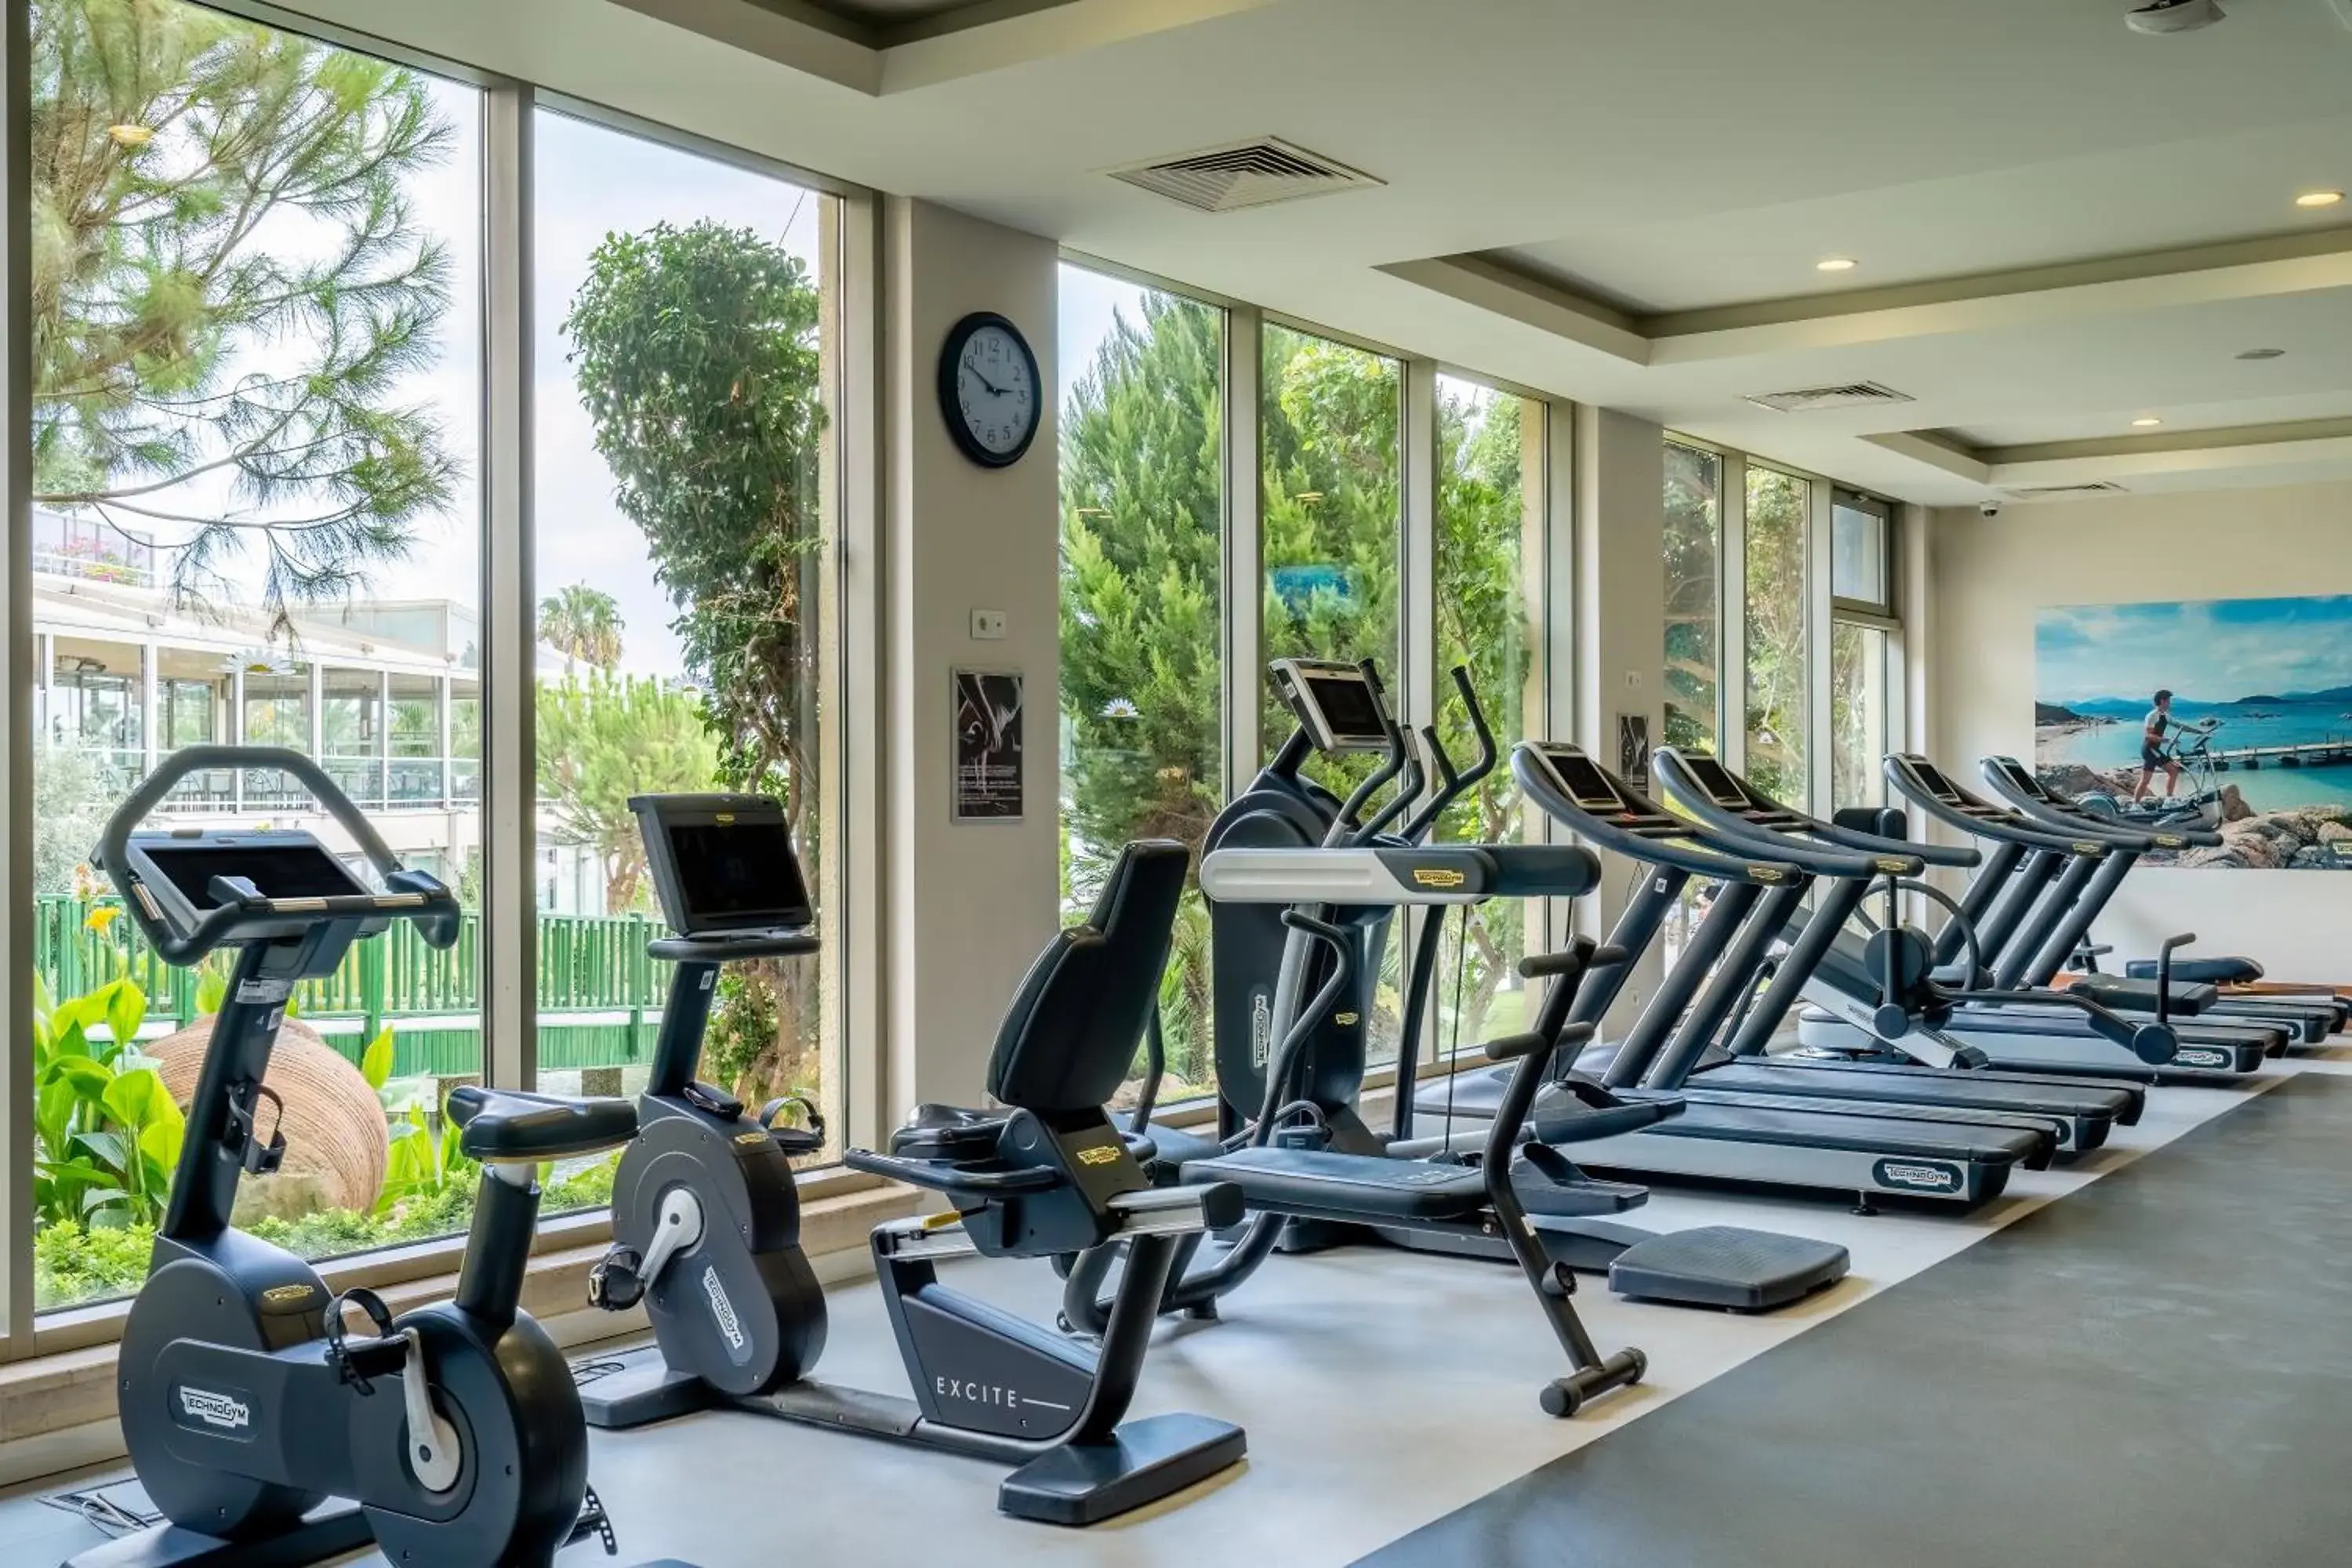 Fitness centre/facilities, Fitness Center/Facilities in Bellis Deluxe Hotel